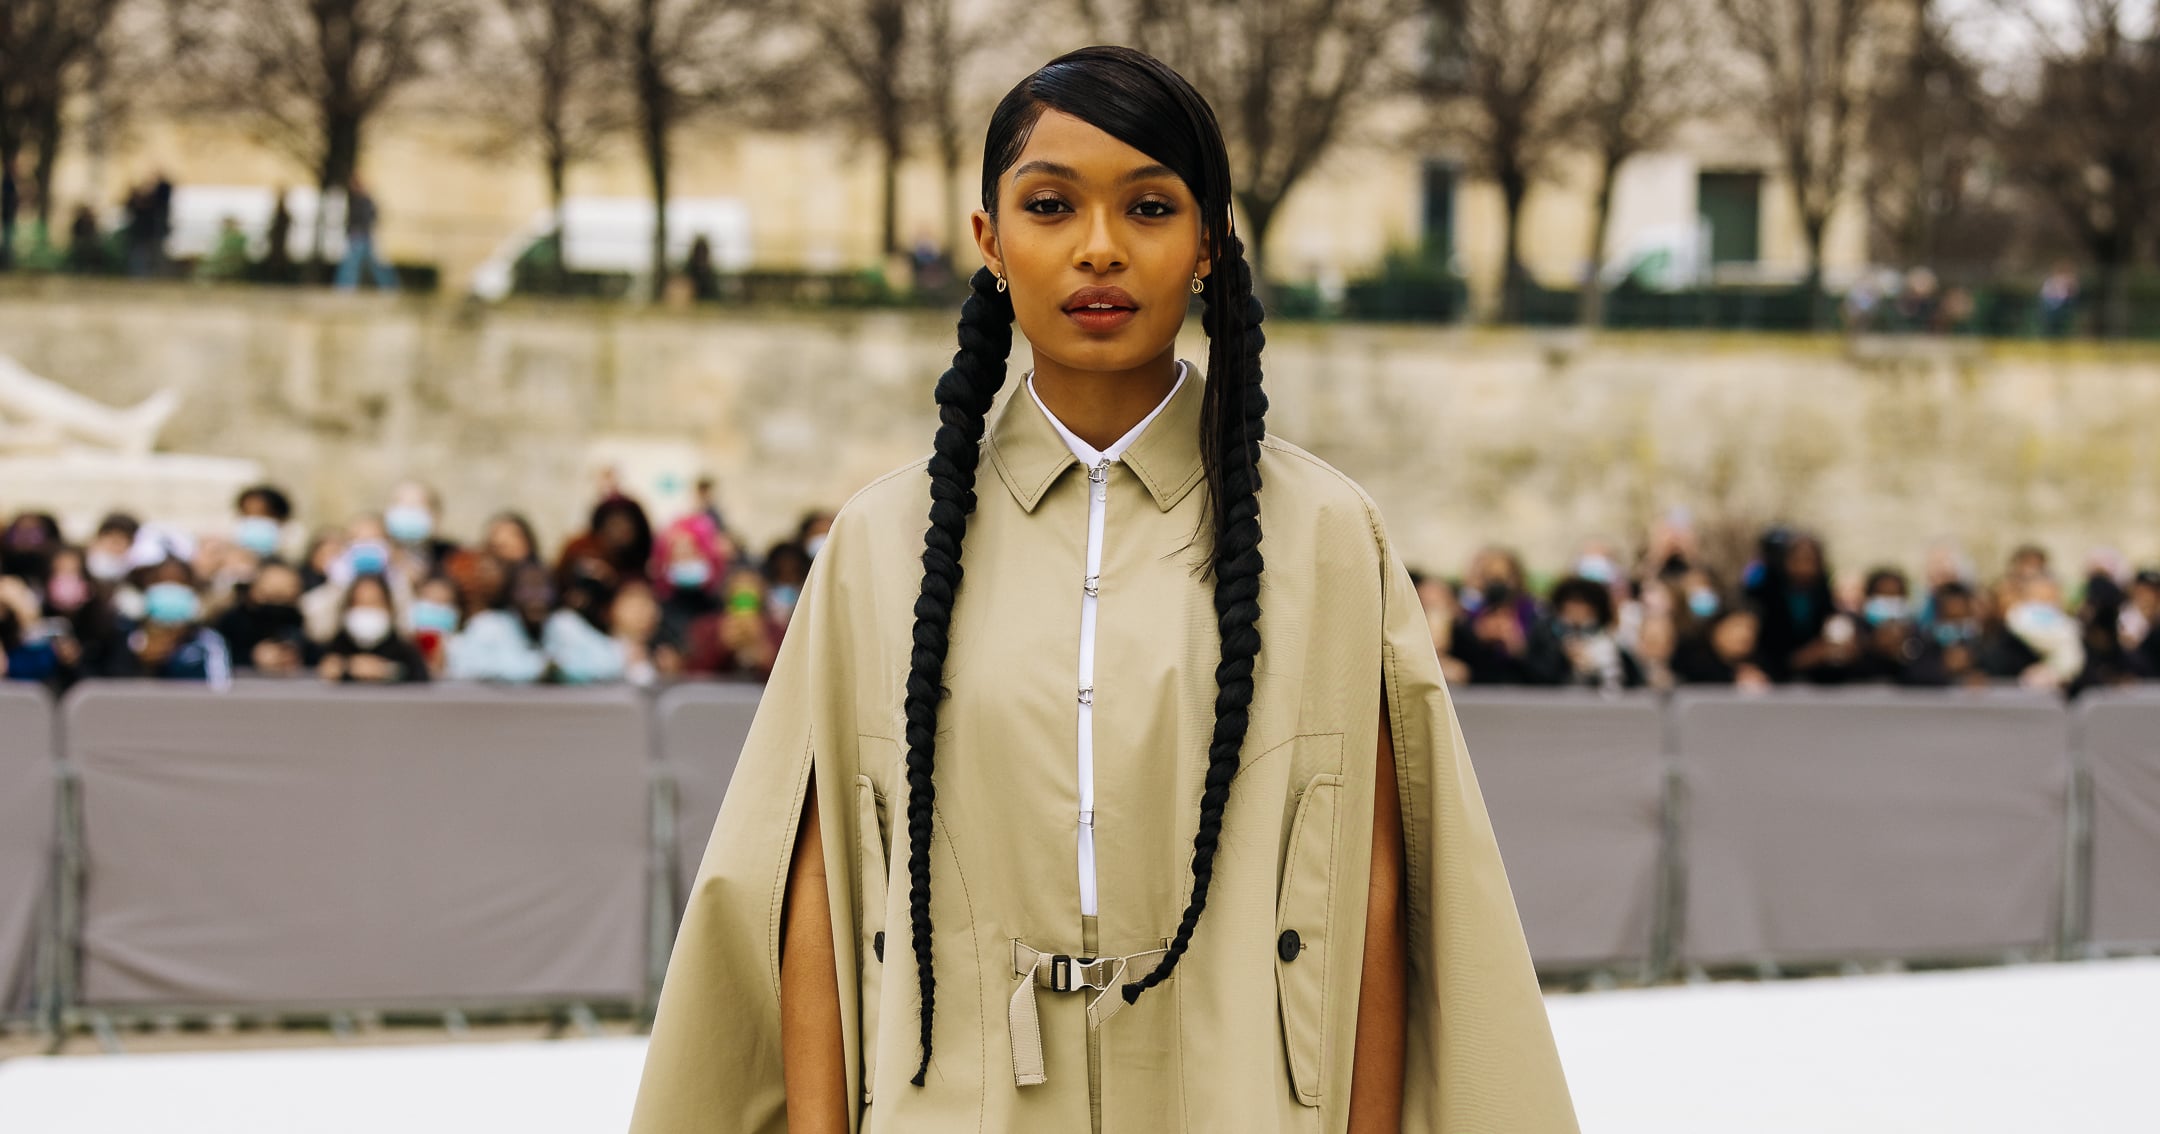 Spring trends we've seen on the streets during Fall 2022 Fashion Weeks